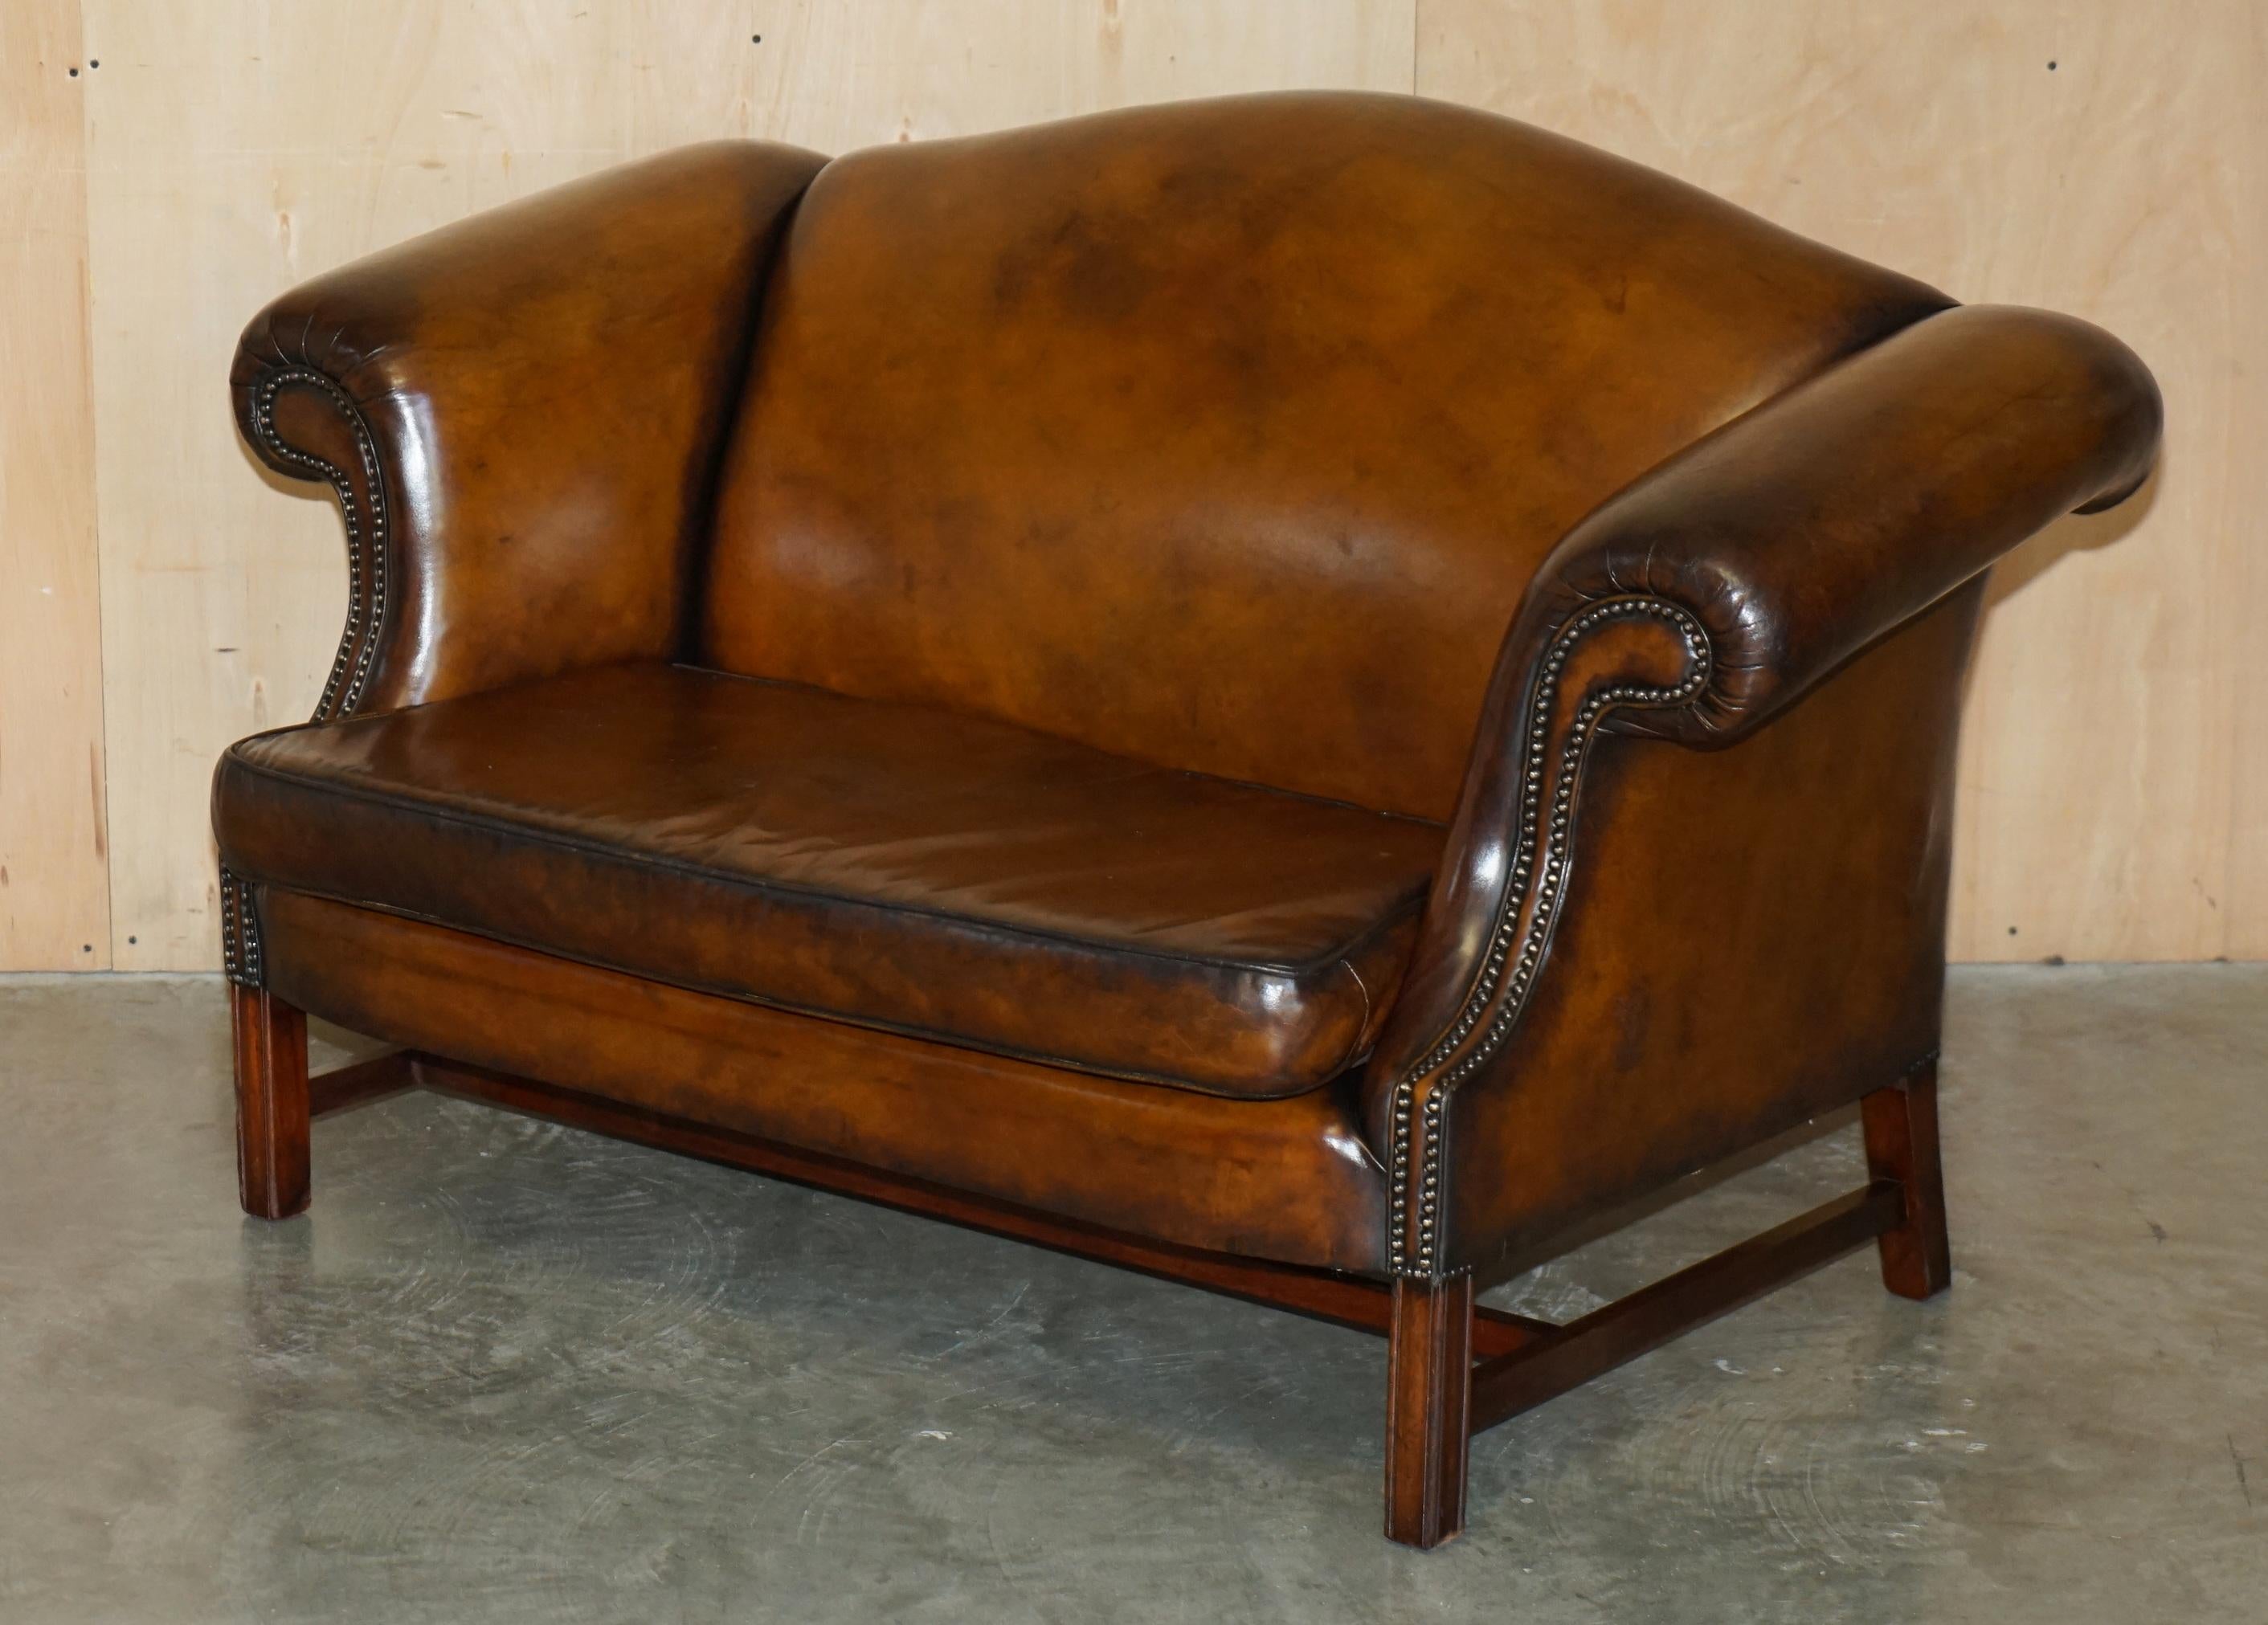 FINE ANTiQUE REGENCY HUMPBACK STYLE RESTORED BROWN LEATHER SOFA ARMCHAIR SUITE For Sale 9